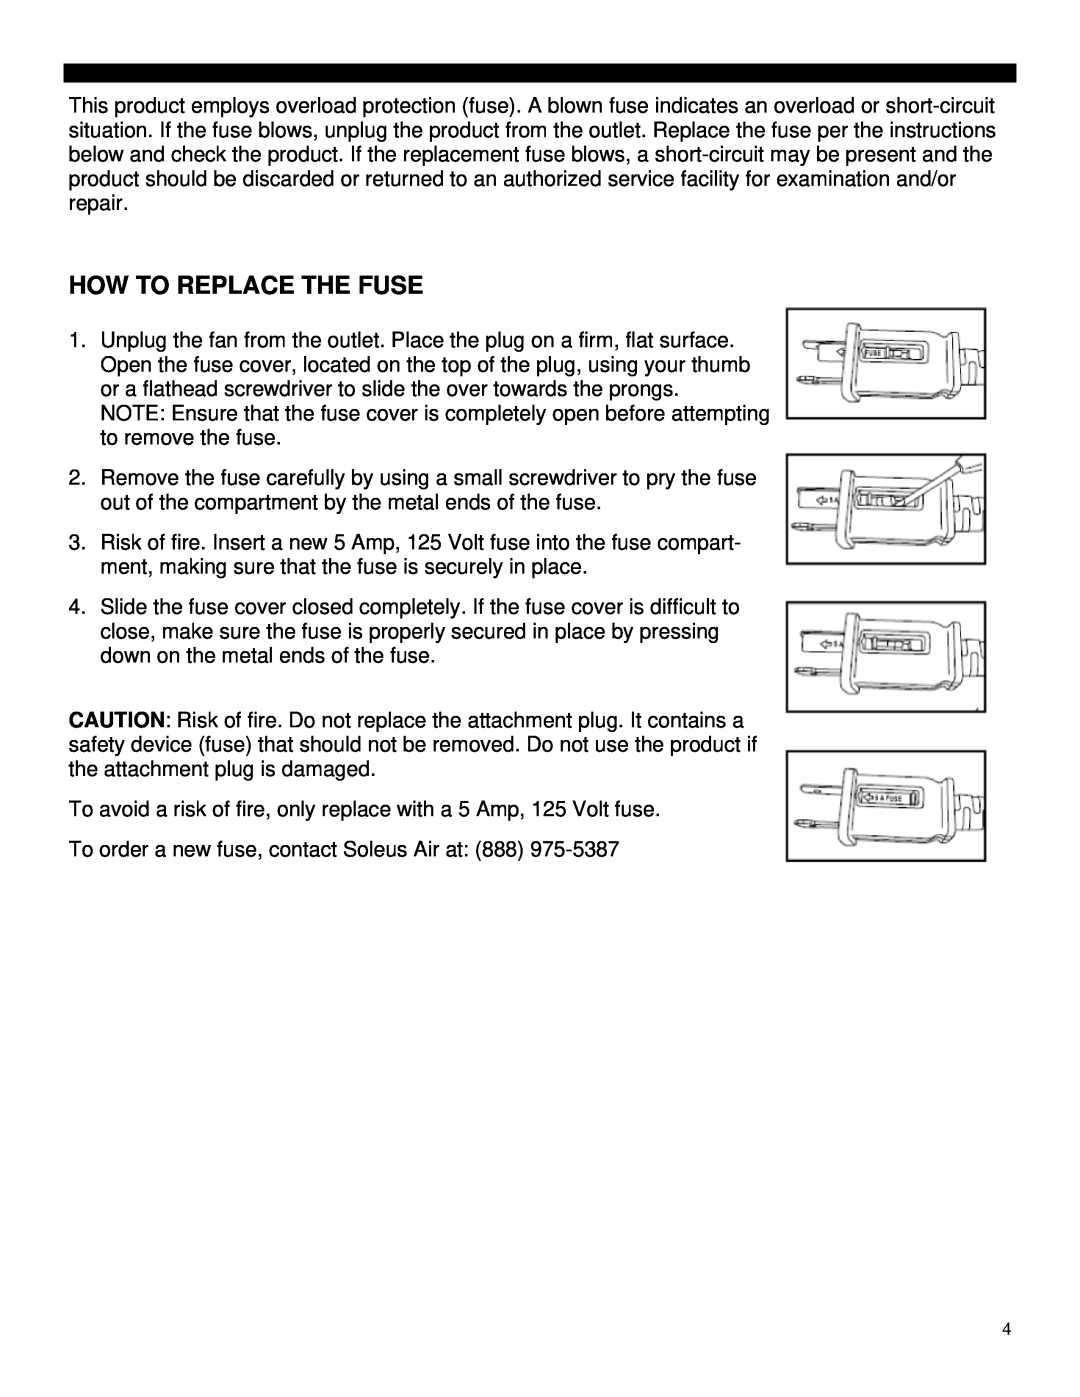 Soleus Air FS2-40R-32 operating instructions How To Replace The Fuse 